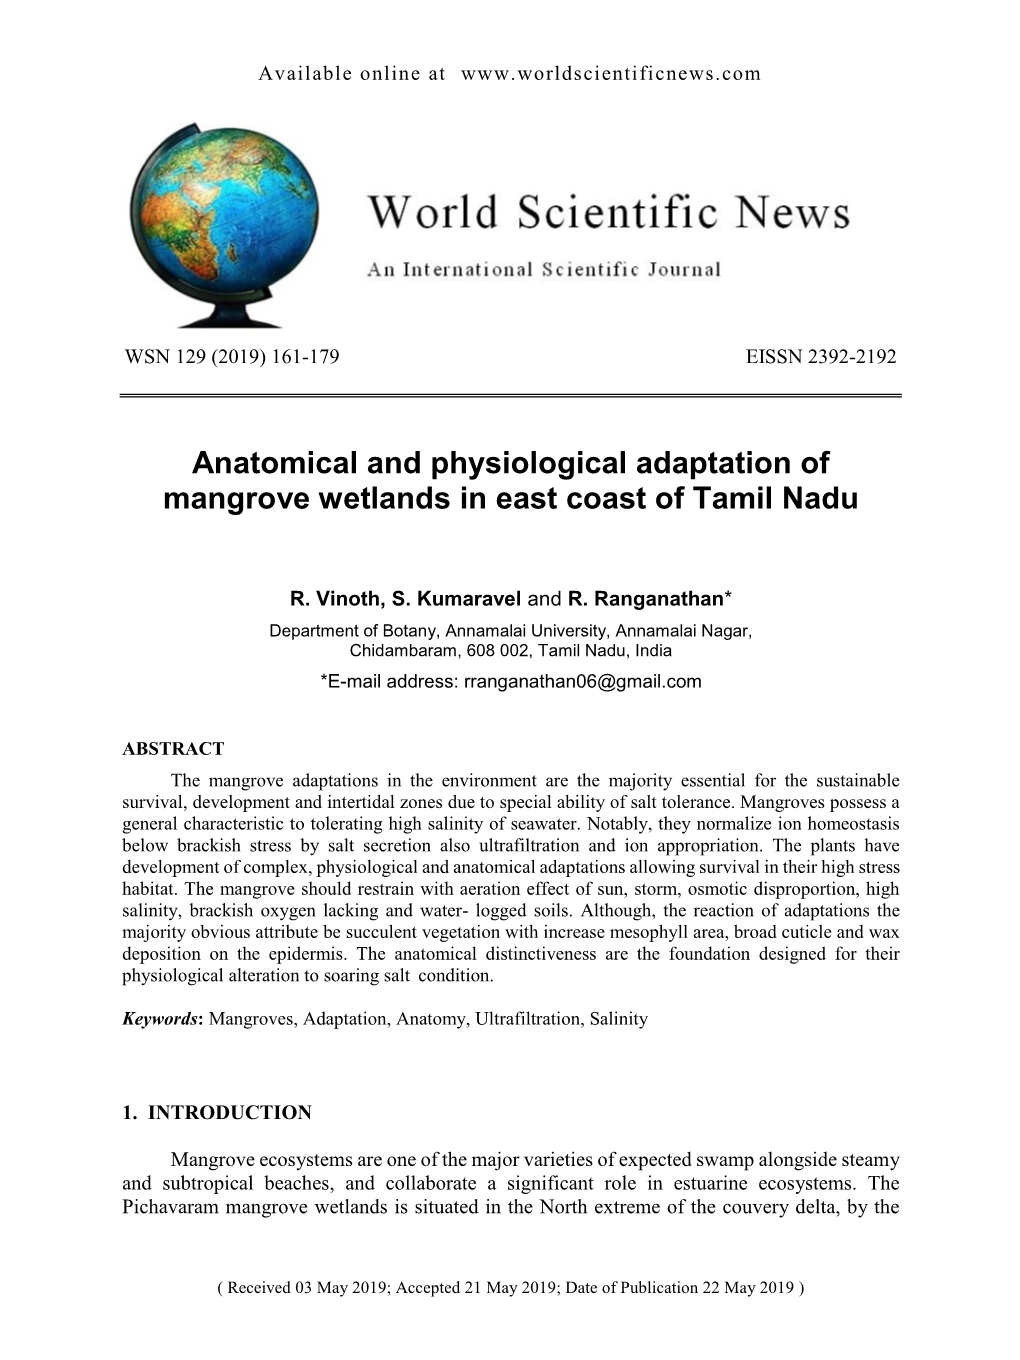 Anatomical and Physiological Adaptation of Mangrove Wetlands in East Coast of Tamil Nadu